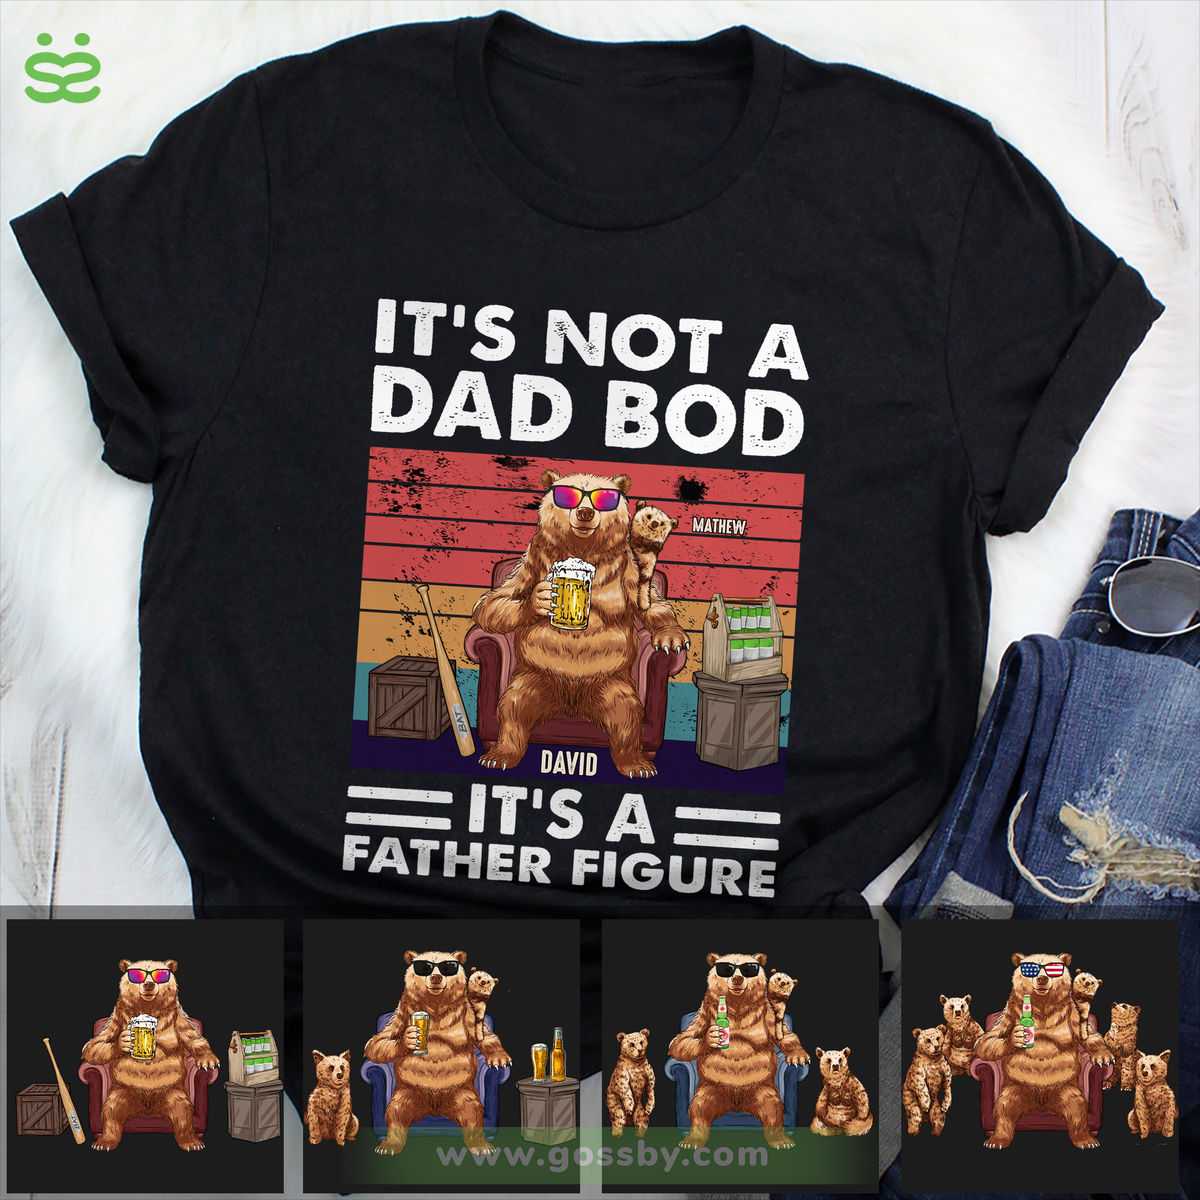 Personalized Shirt - Father & Kids - It's Not A Dad Bod, It's A Father Figure (Retro)_1